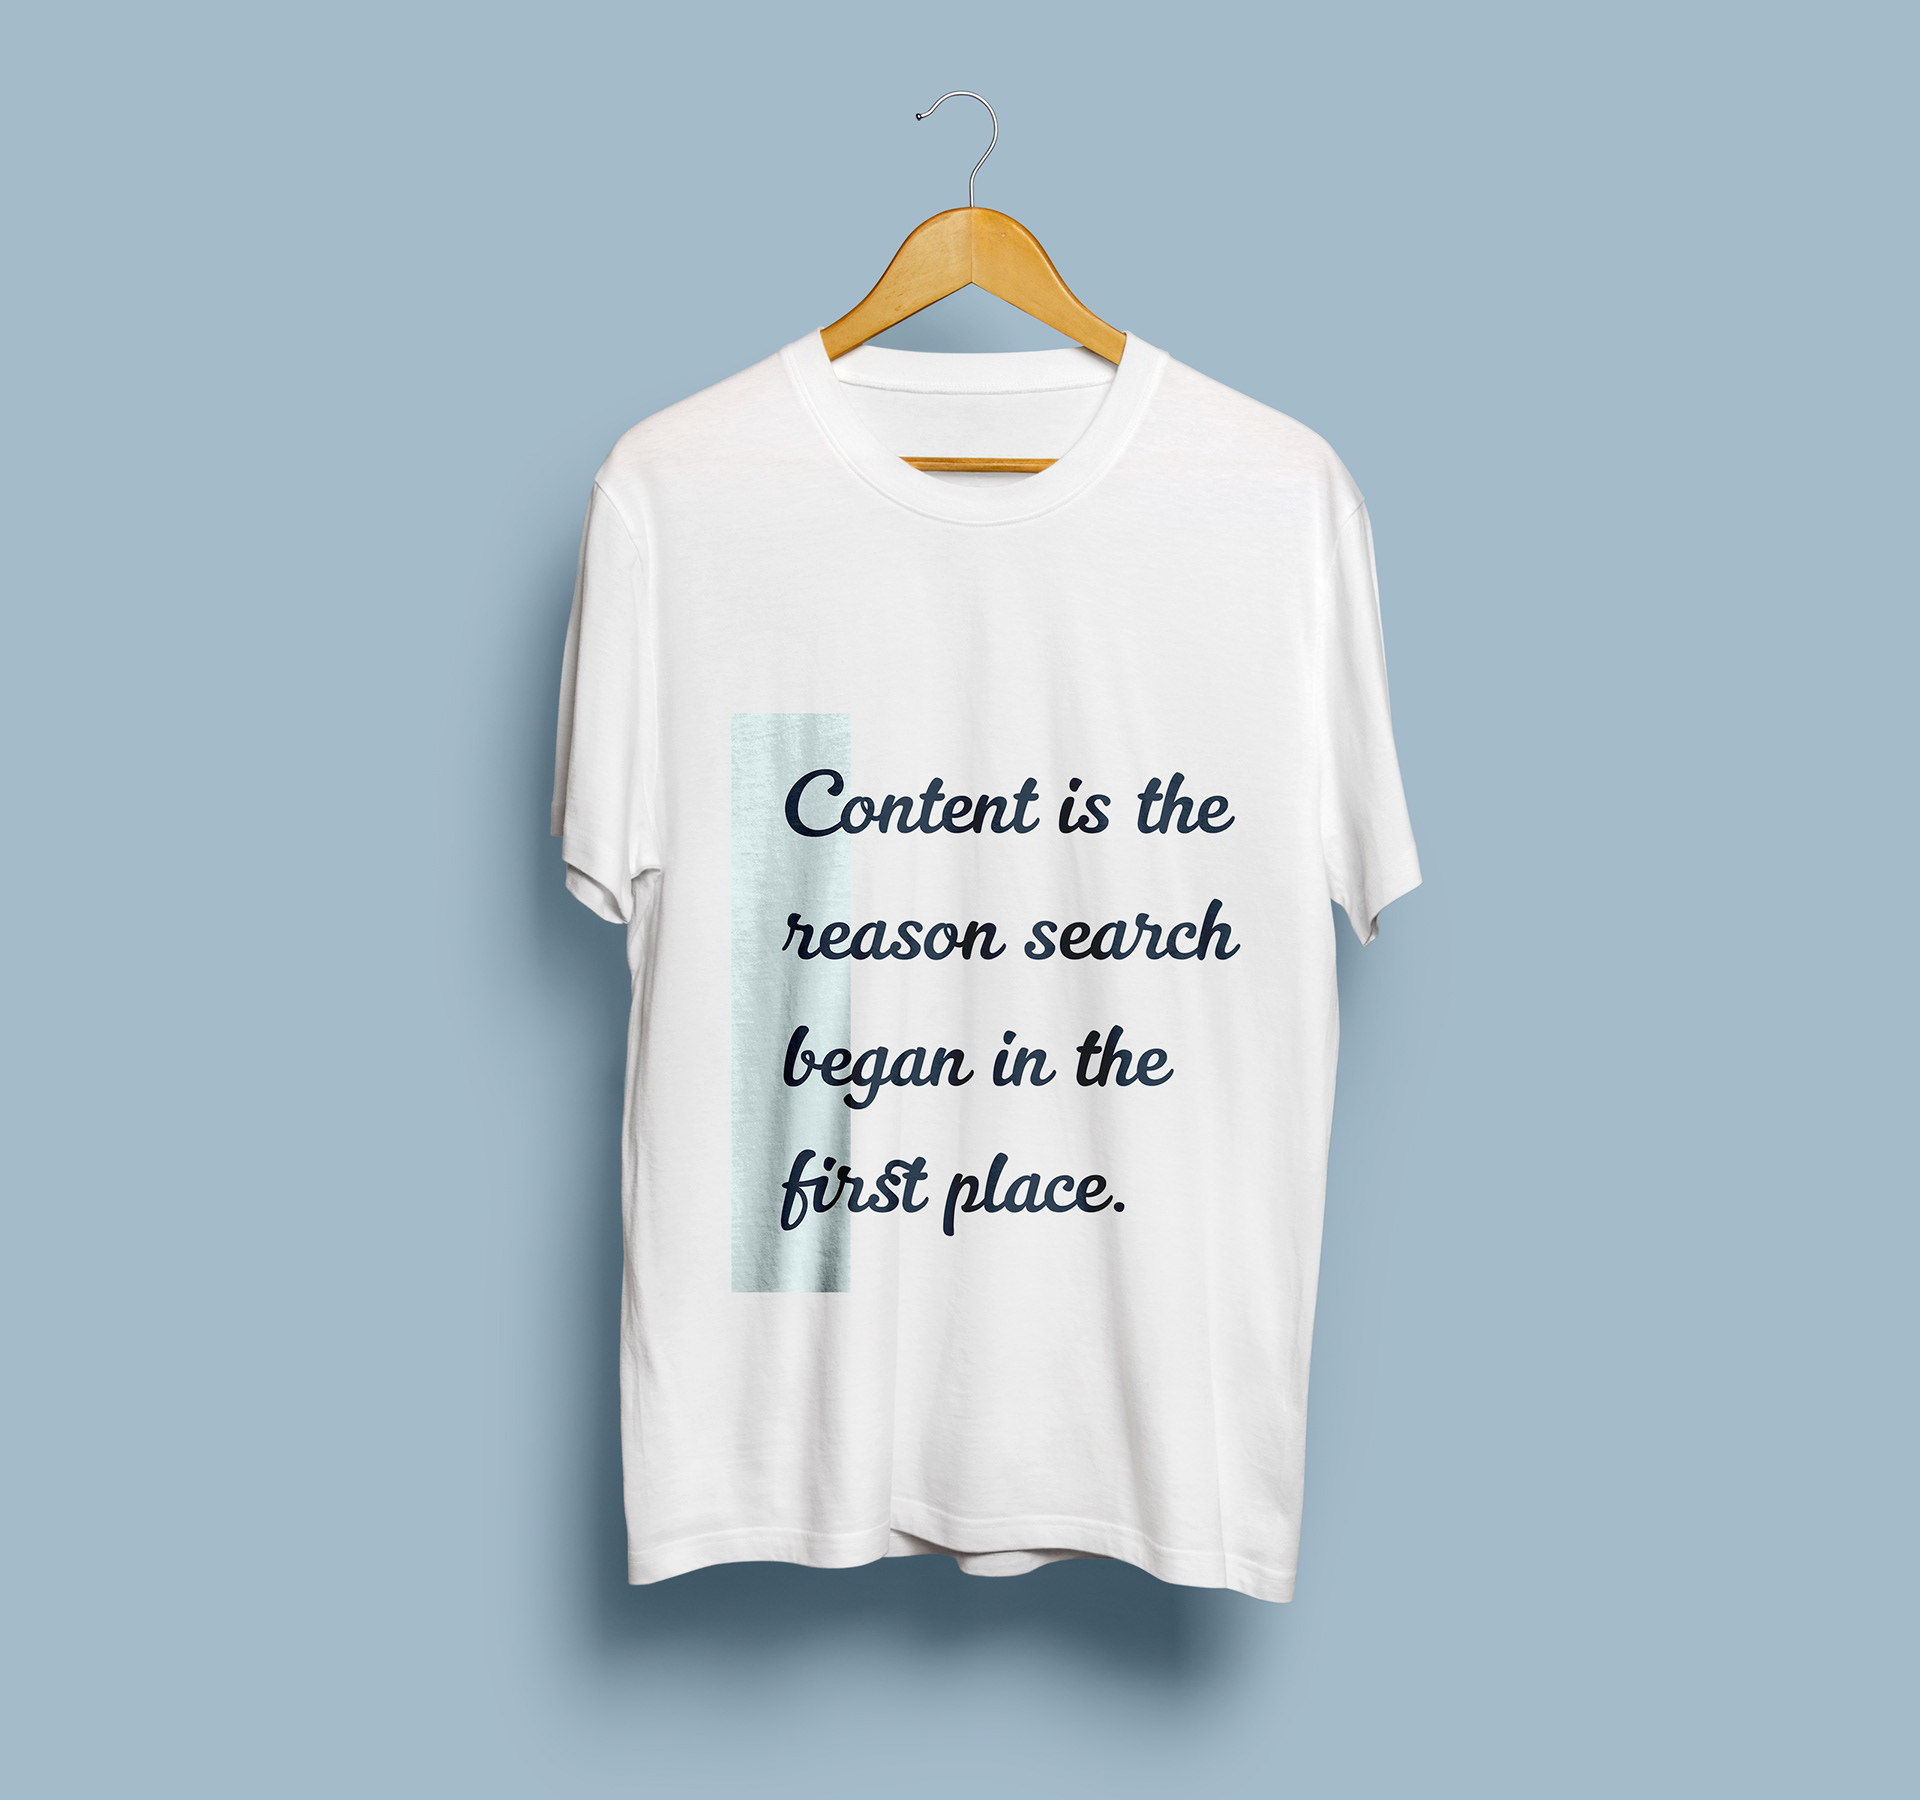 Content is the reason search... t-shirt design